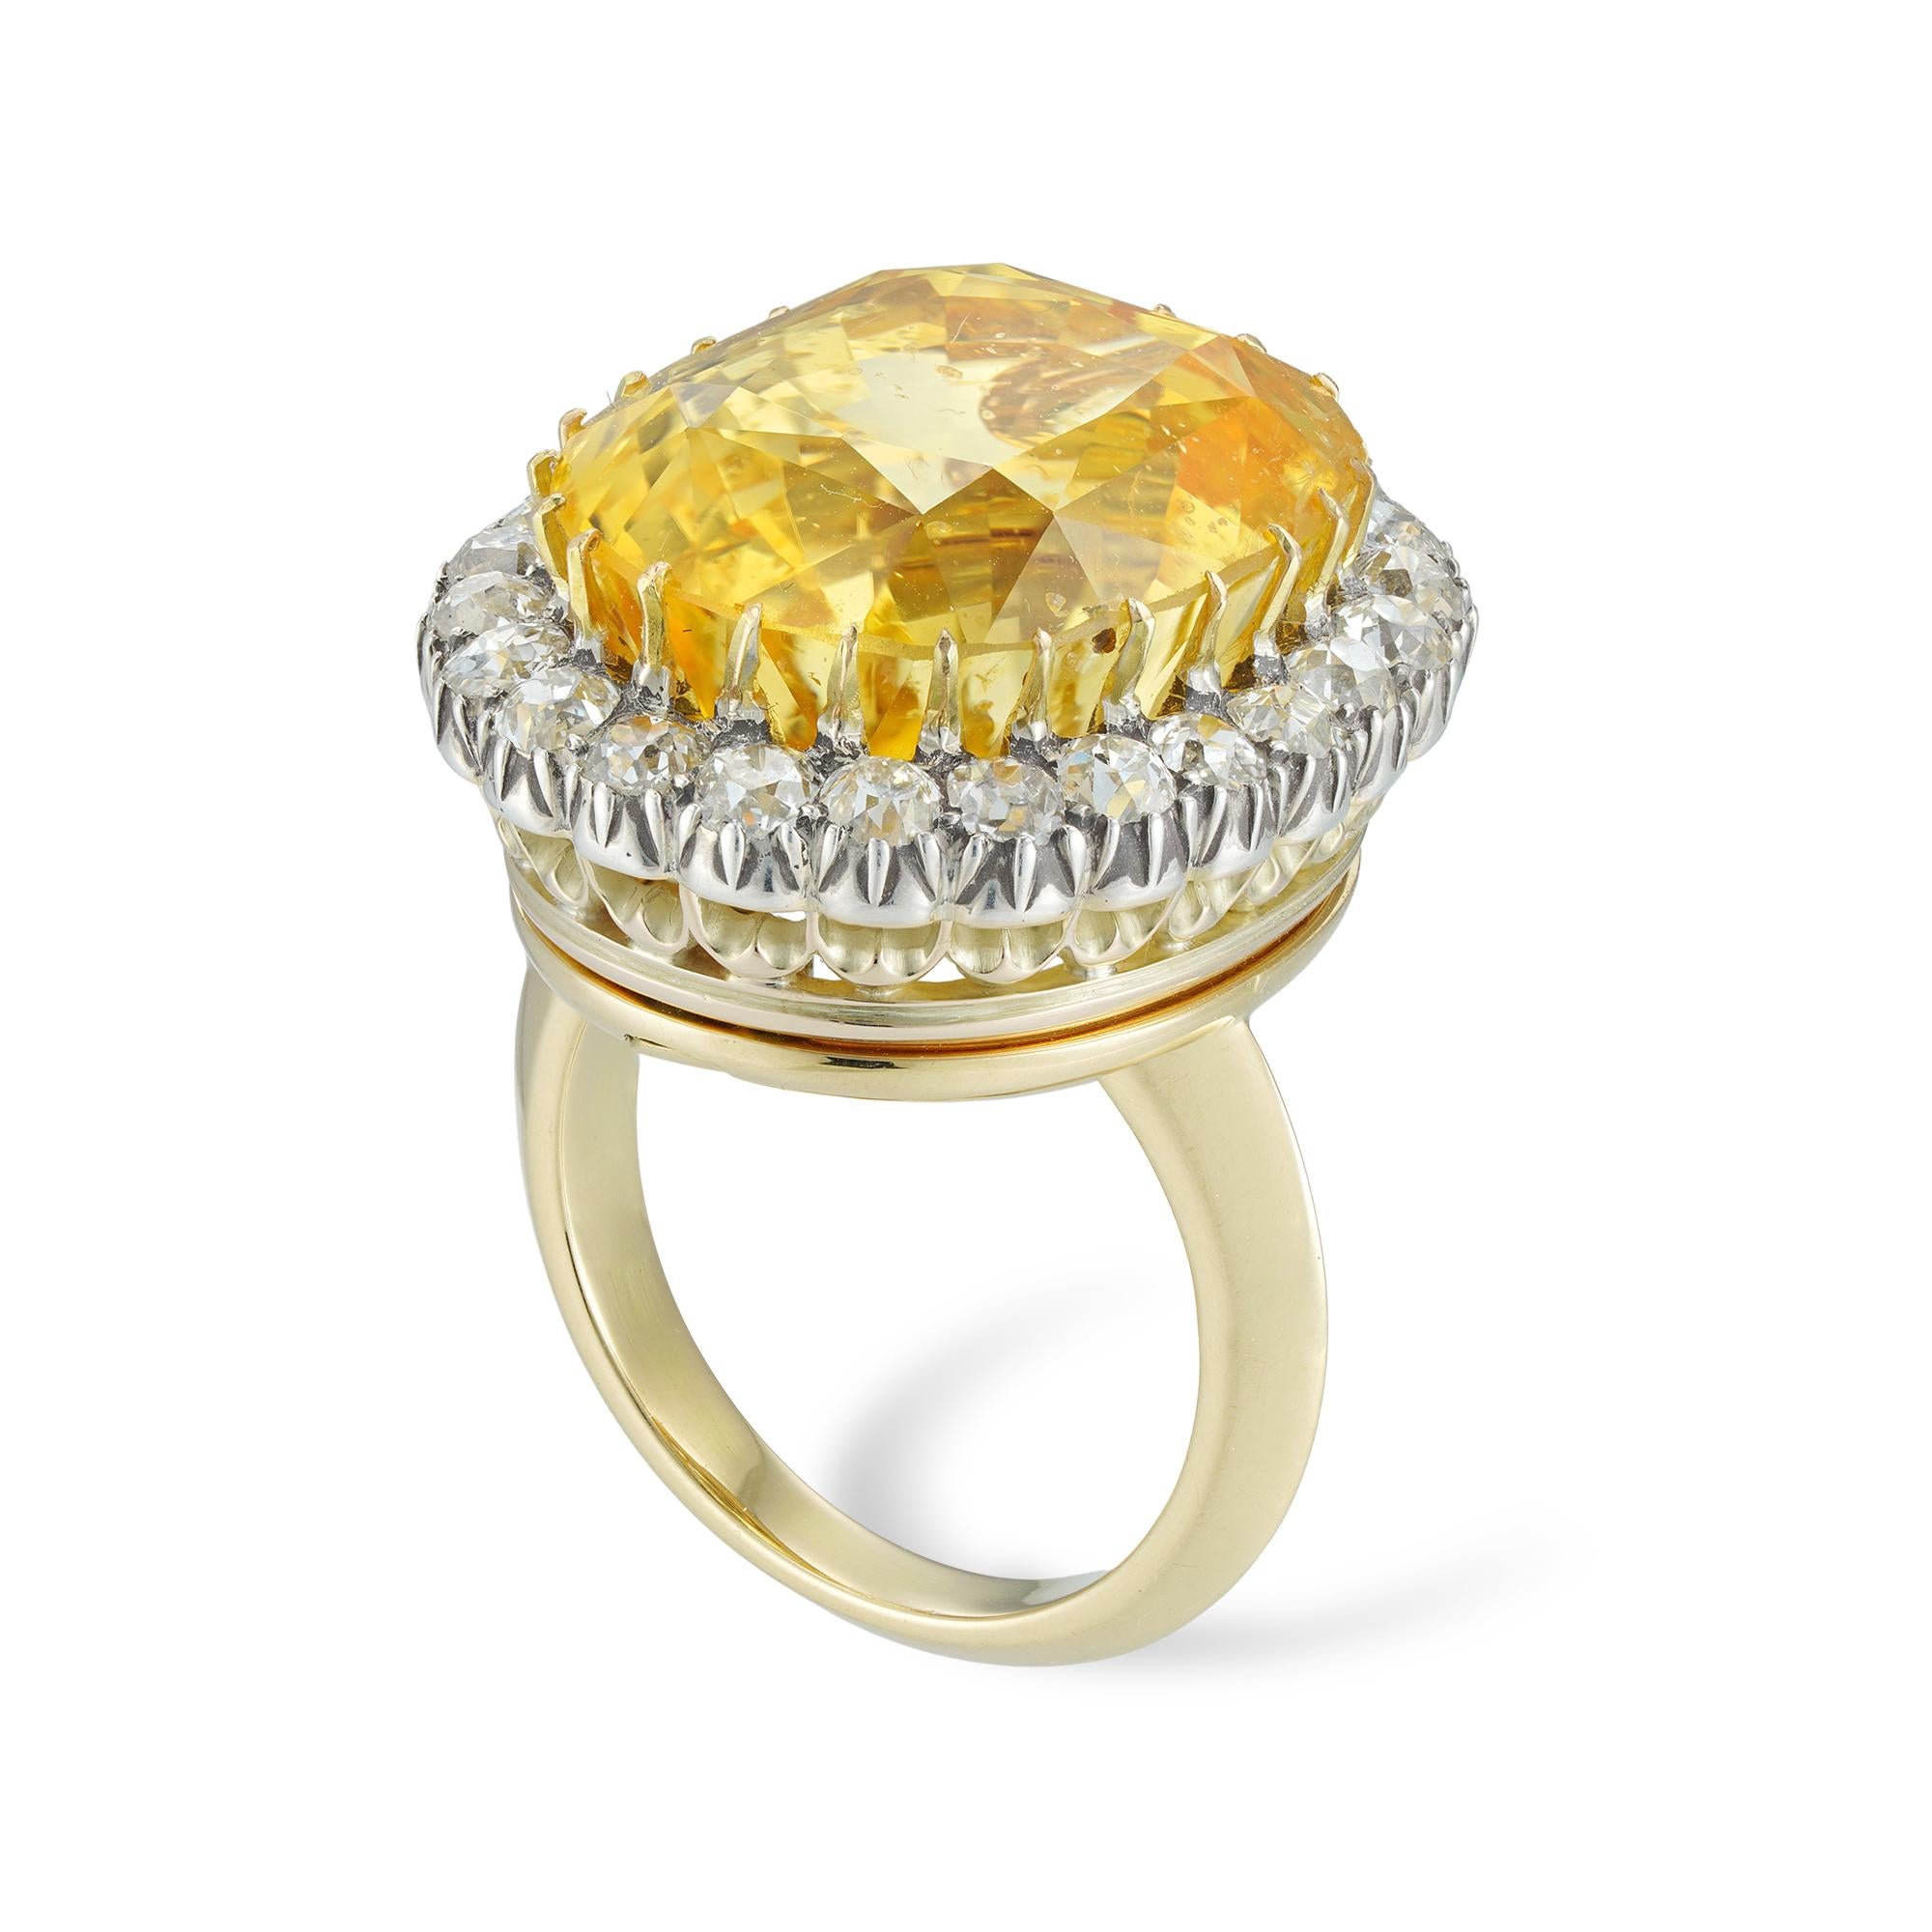 An Important Victorian yellow sapphire and diamond brooch/ring, the natural sapphire weighing 31.58 carats, accompanied by GCS Report stating to be of Sri Lankan origin with no indication of heating, claw-set in yellow gold, surrounded by twenty